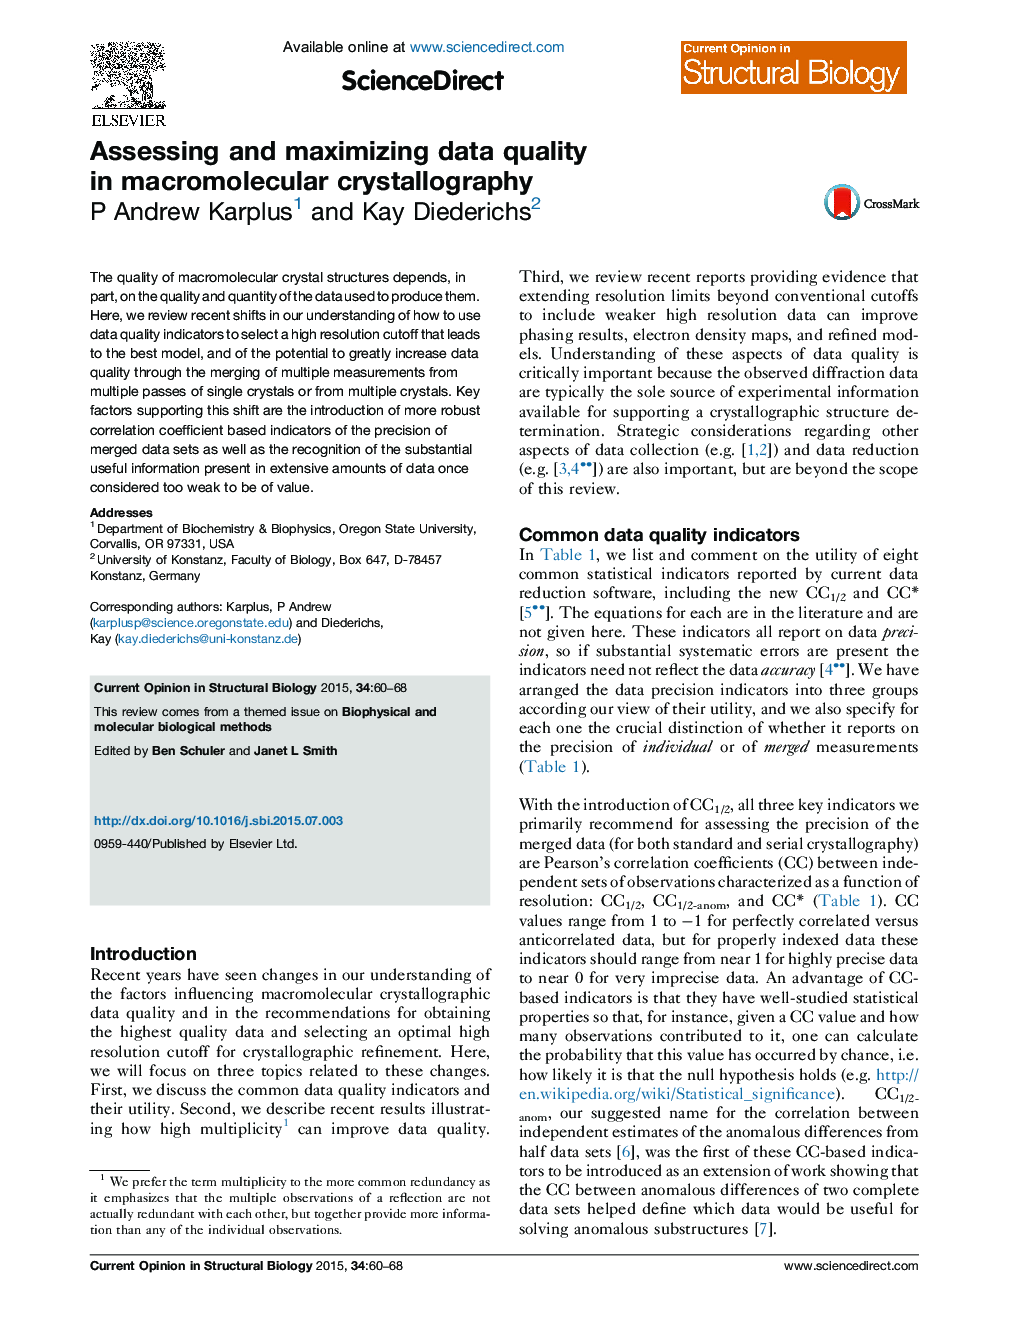 Assessing and maximizing data quality in macromolecular crystallography